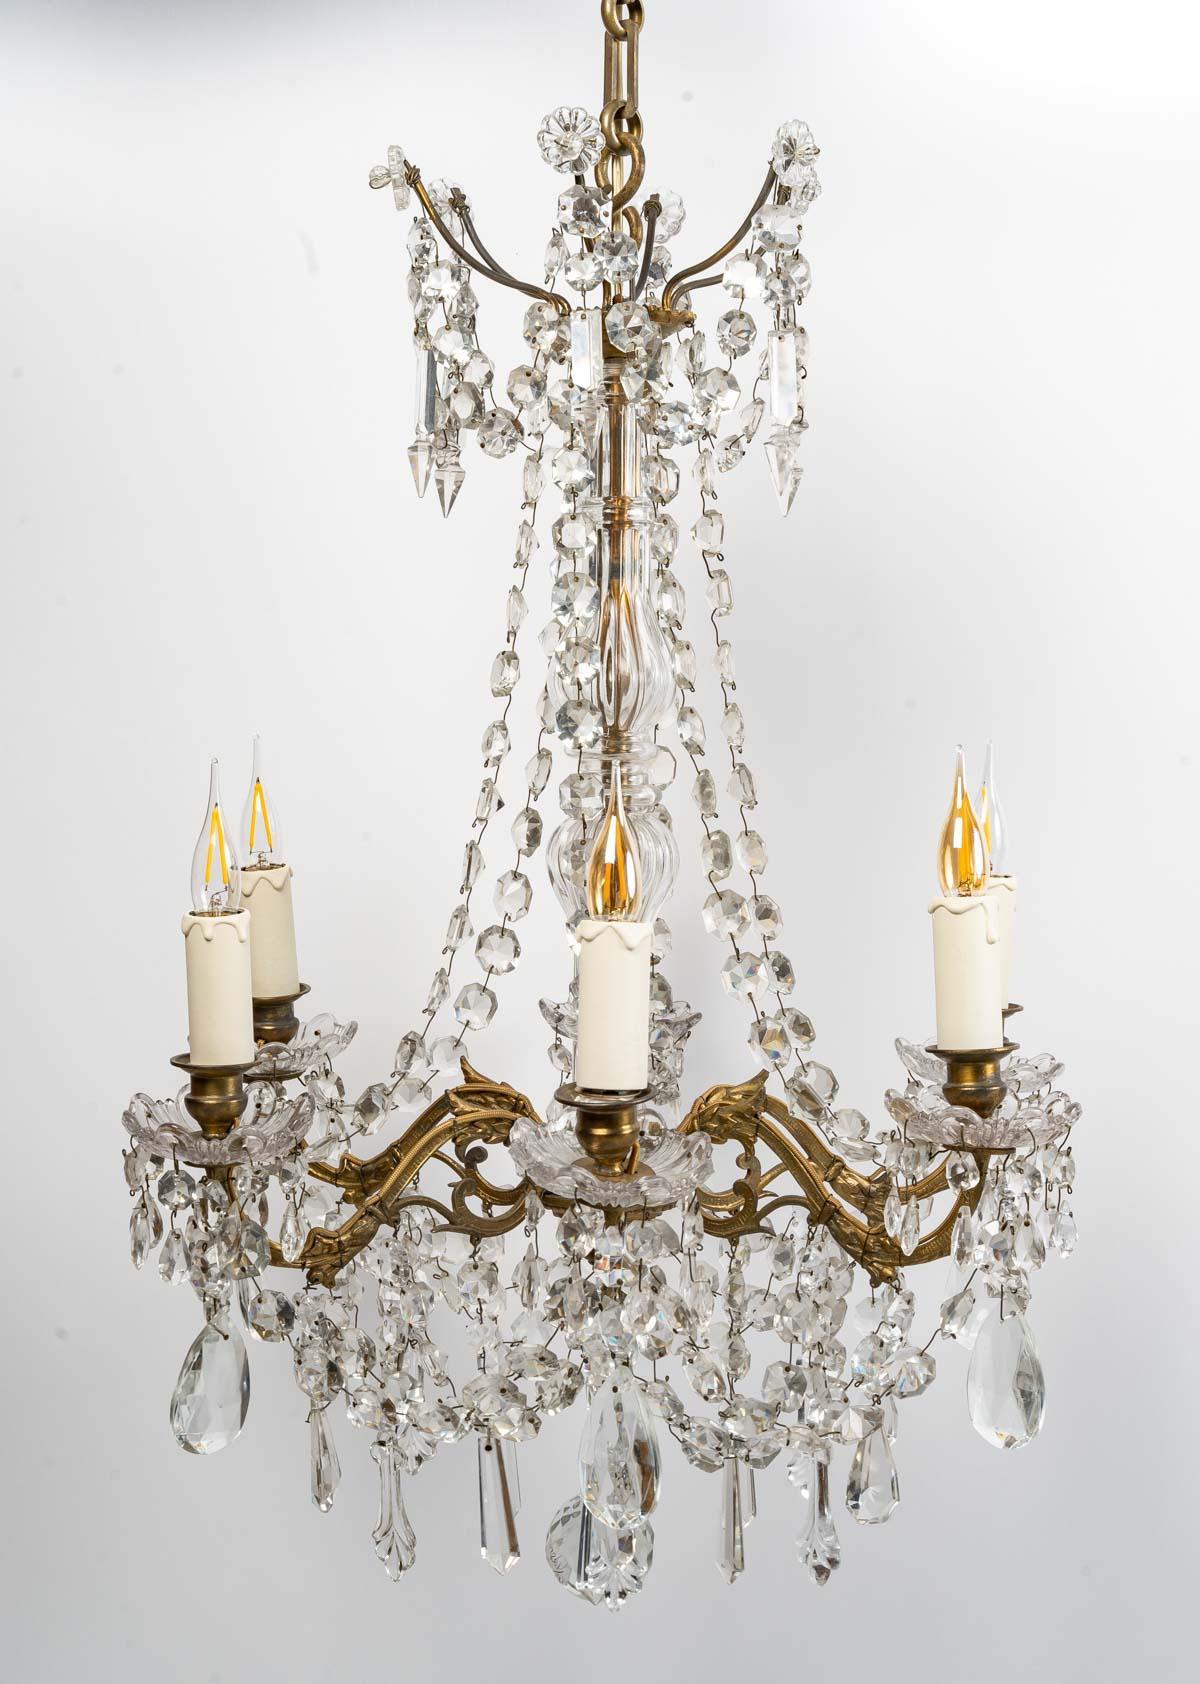 Baccarat crystal chandelier, 19th century
A Baccarat crystal chandelier with six lights, 19th century, Napoleon III period.
H: 70 cm, d: 50 cm